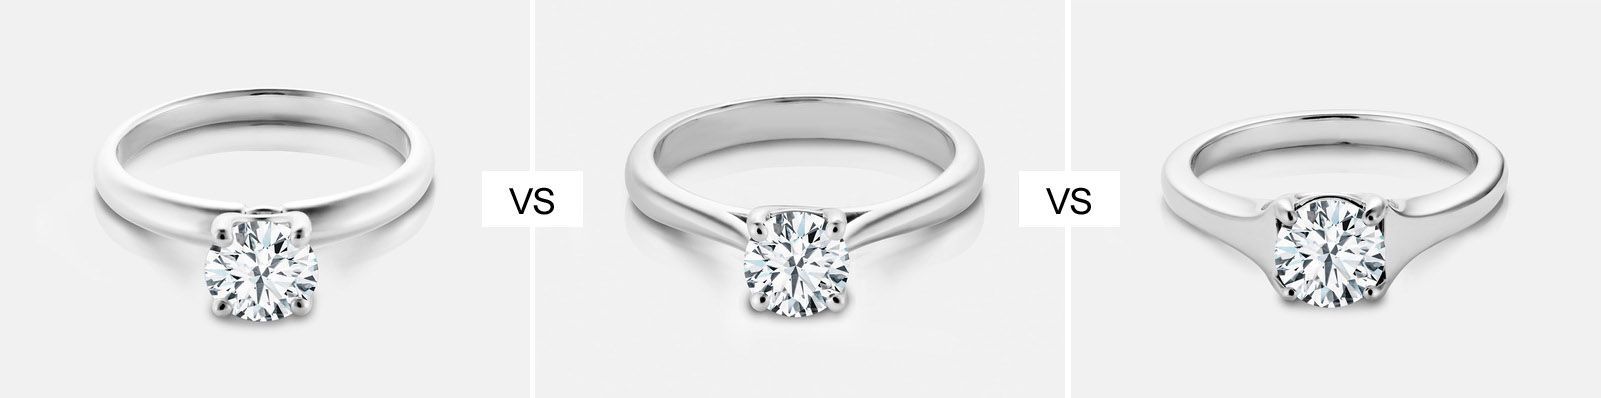 Straight vs Tapered Band Engagement Ring